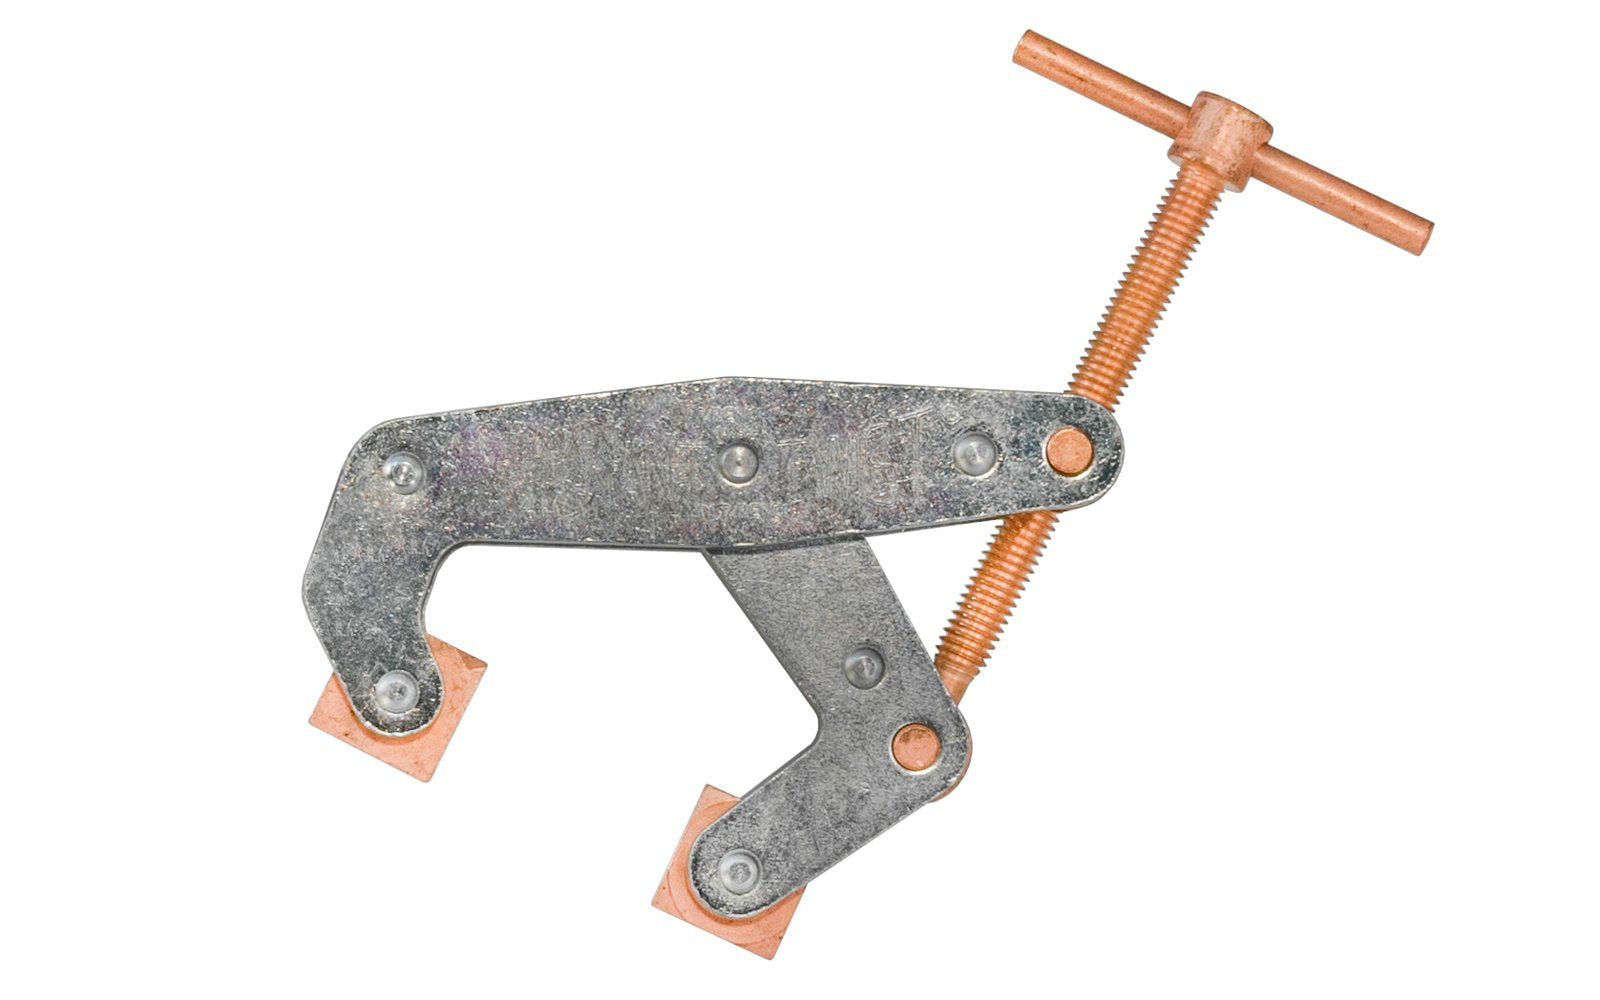 Kant Twist Cantilever Clamp - Made in USA ~ T-Handle - Copper plated jaws, screw & T-handle are ideal for welding - Great for spot welding, drilling, bolting - Three different gripping faces: Knurled, smooth & V-slot for holding round stock - Eliminates the distorting & twisting of your work pieces & provides a strong, 4:1 clamp ratio - Deep Throat